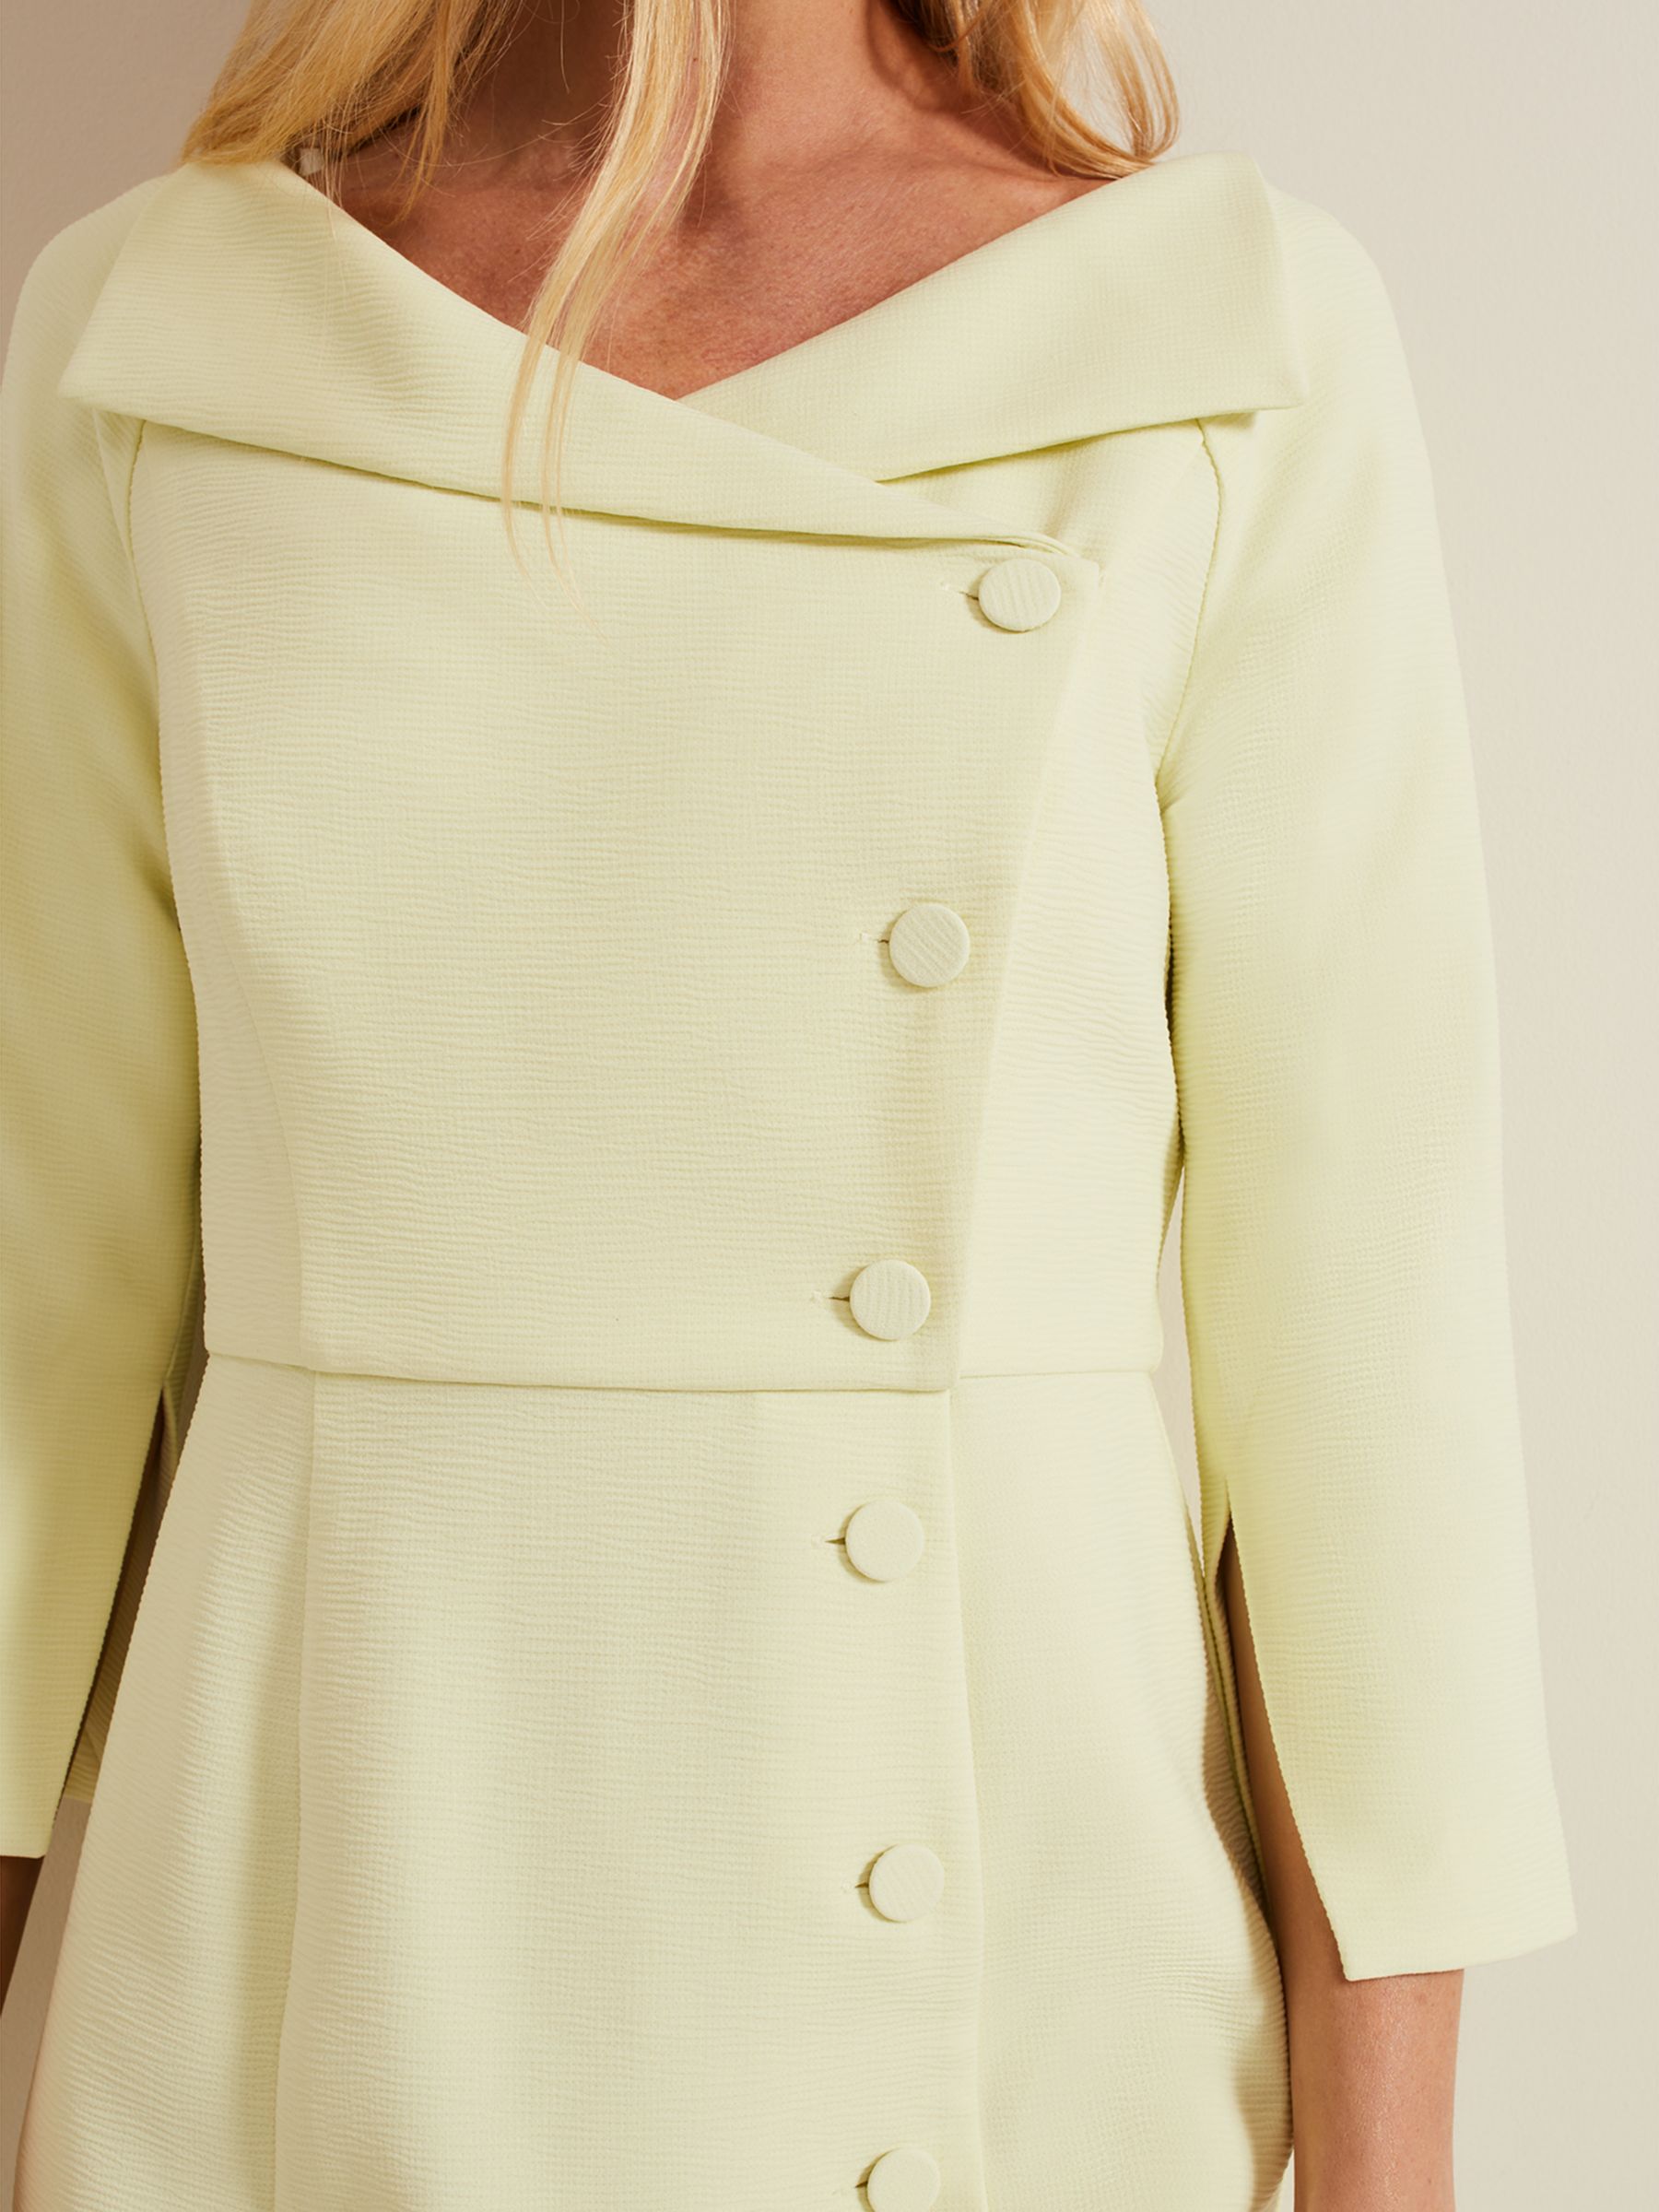 Buy Phase Eight Sienna Tux Style Midi Dress, Pale Yellow Online at johnlewis.com